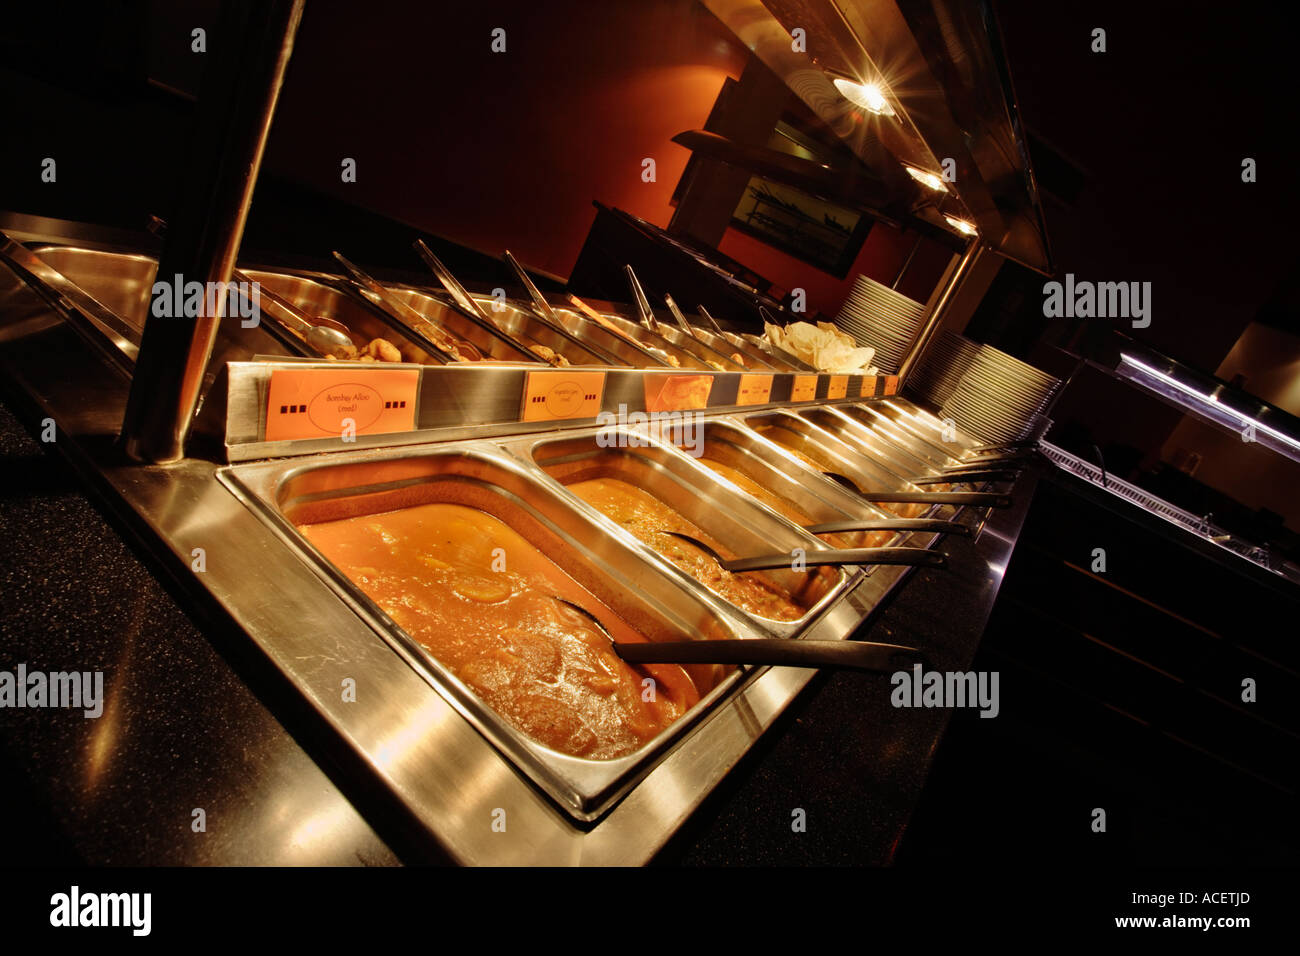 Curry, Indian food, at a help yourself buffet in an Indian Restaurant, UK Stock Photo